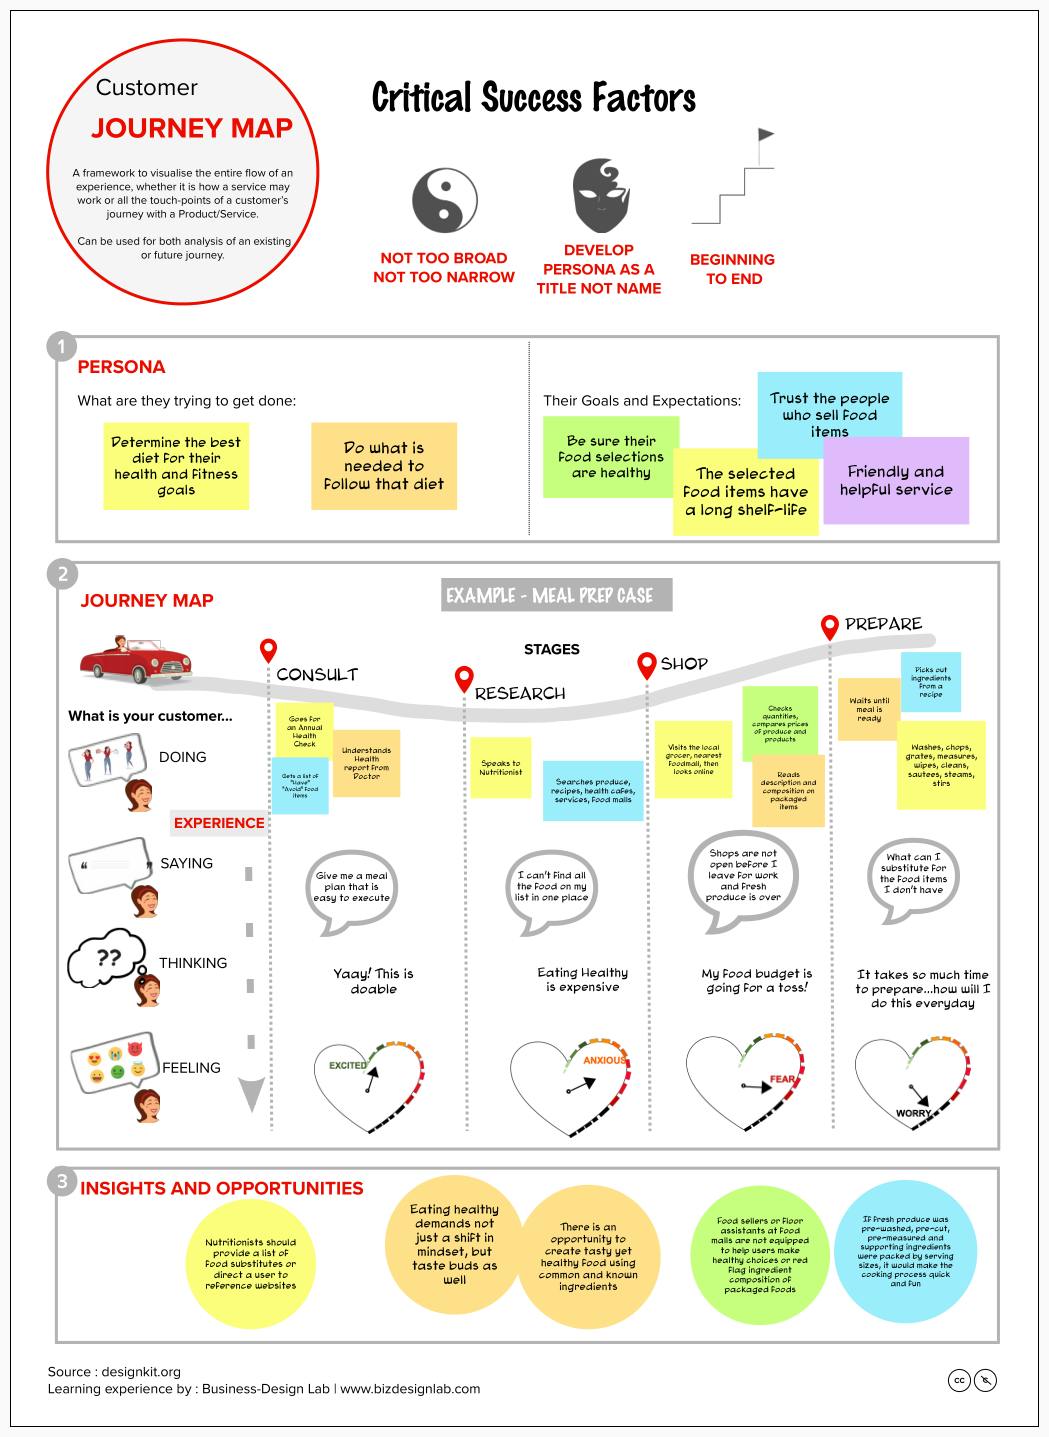 CUSTOMER JOURNEY MAP.png